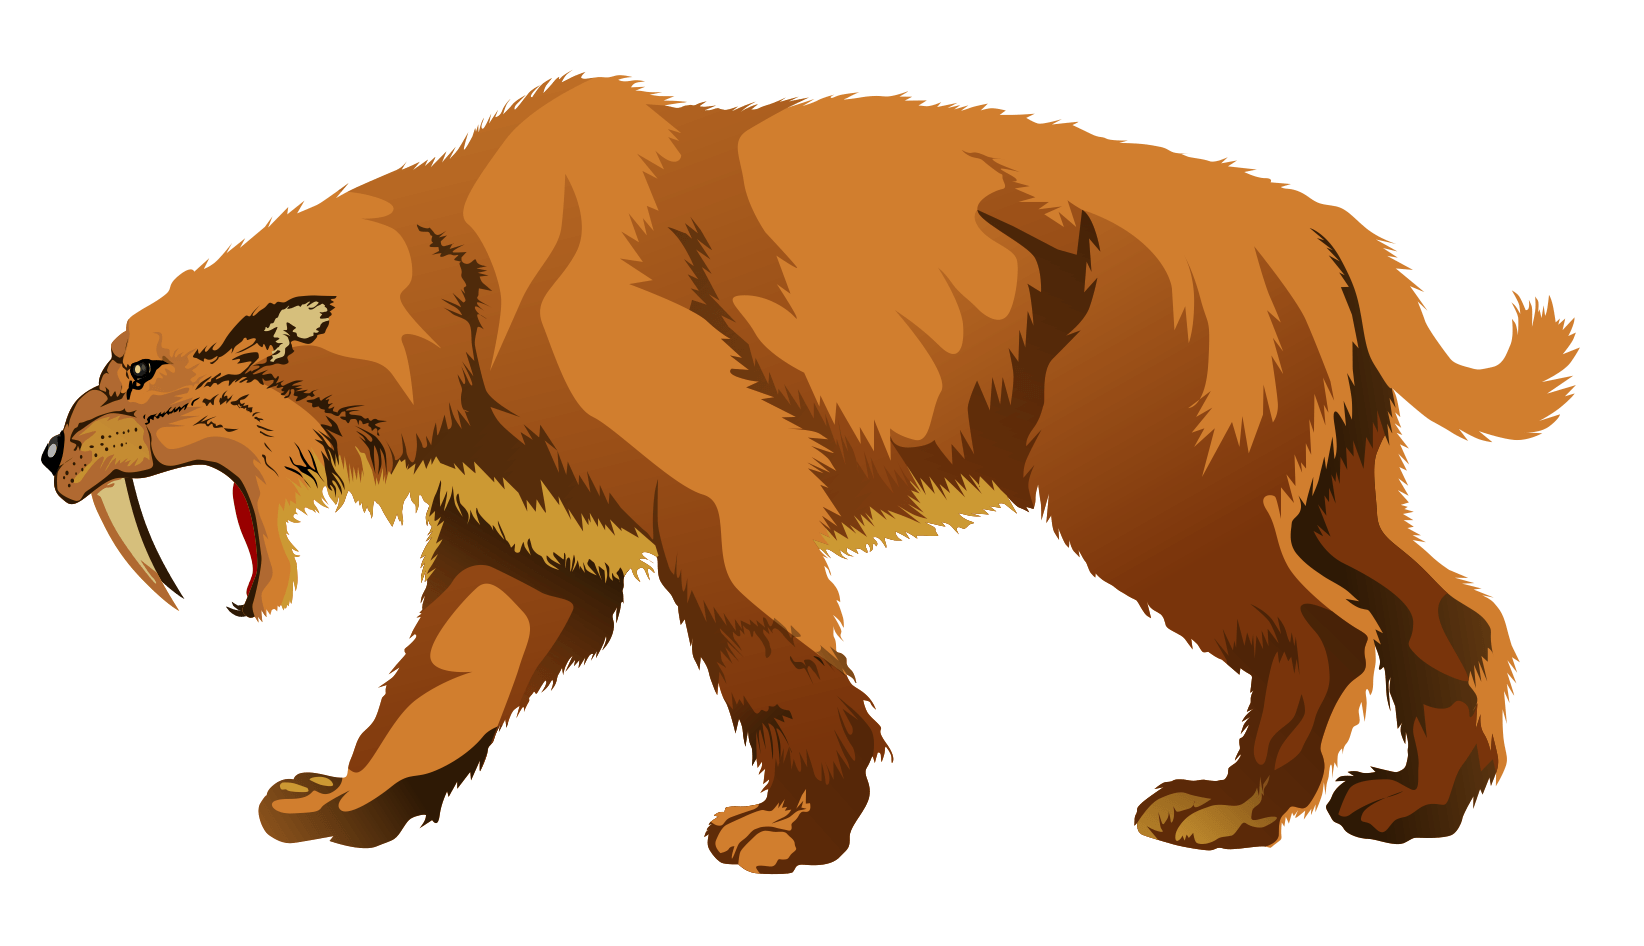 Free download Saber Tooth Tiger Picture The sabre toothed